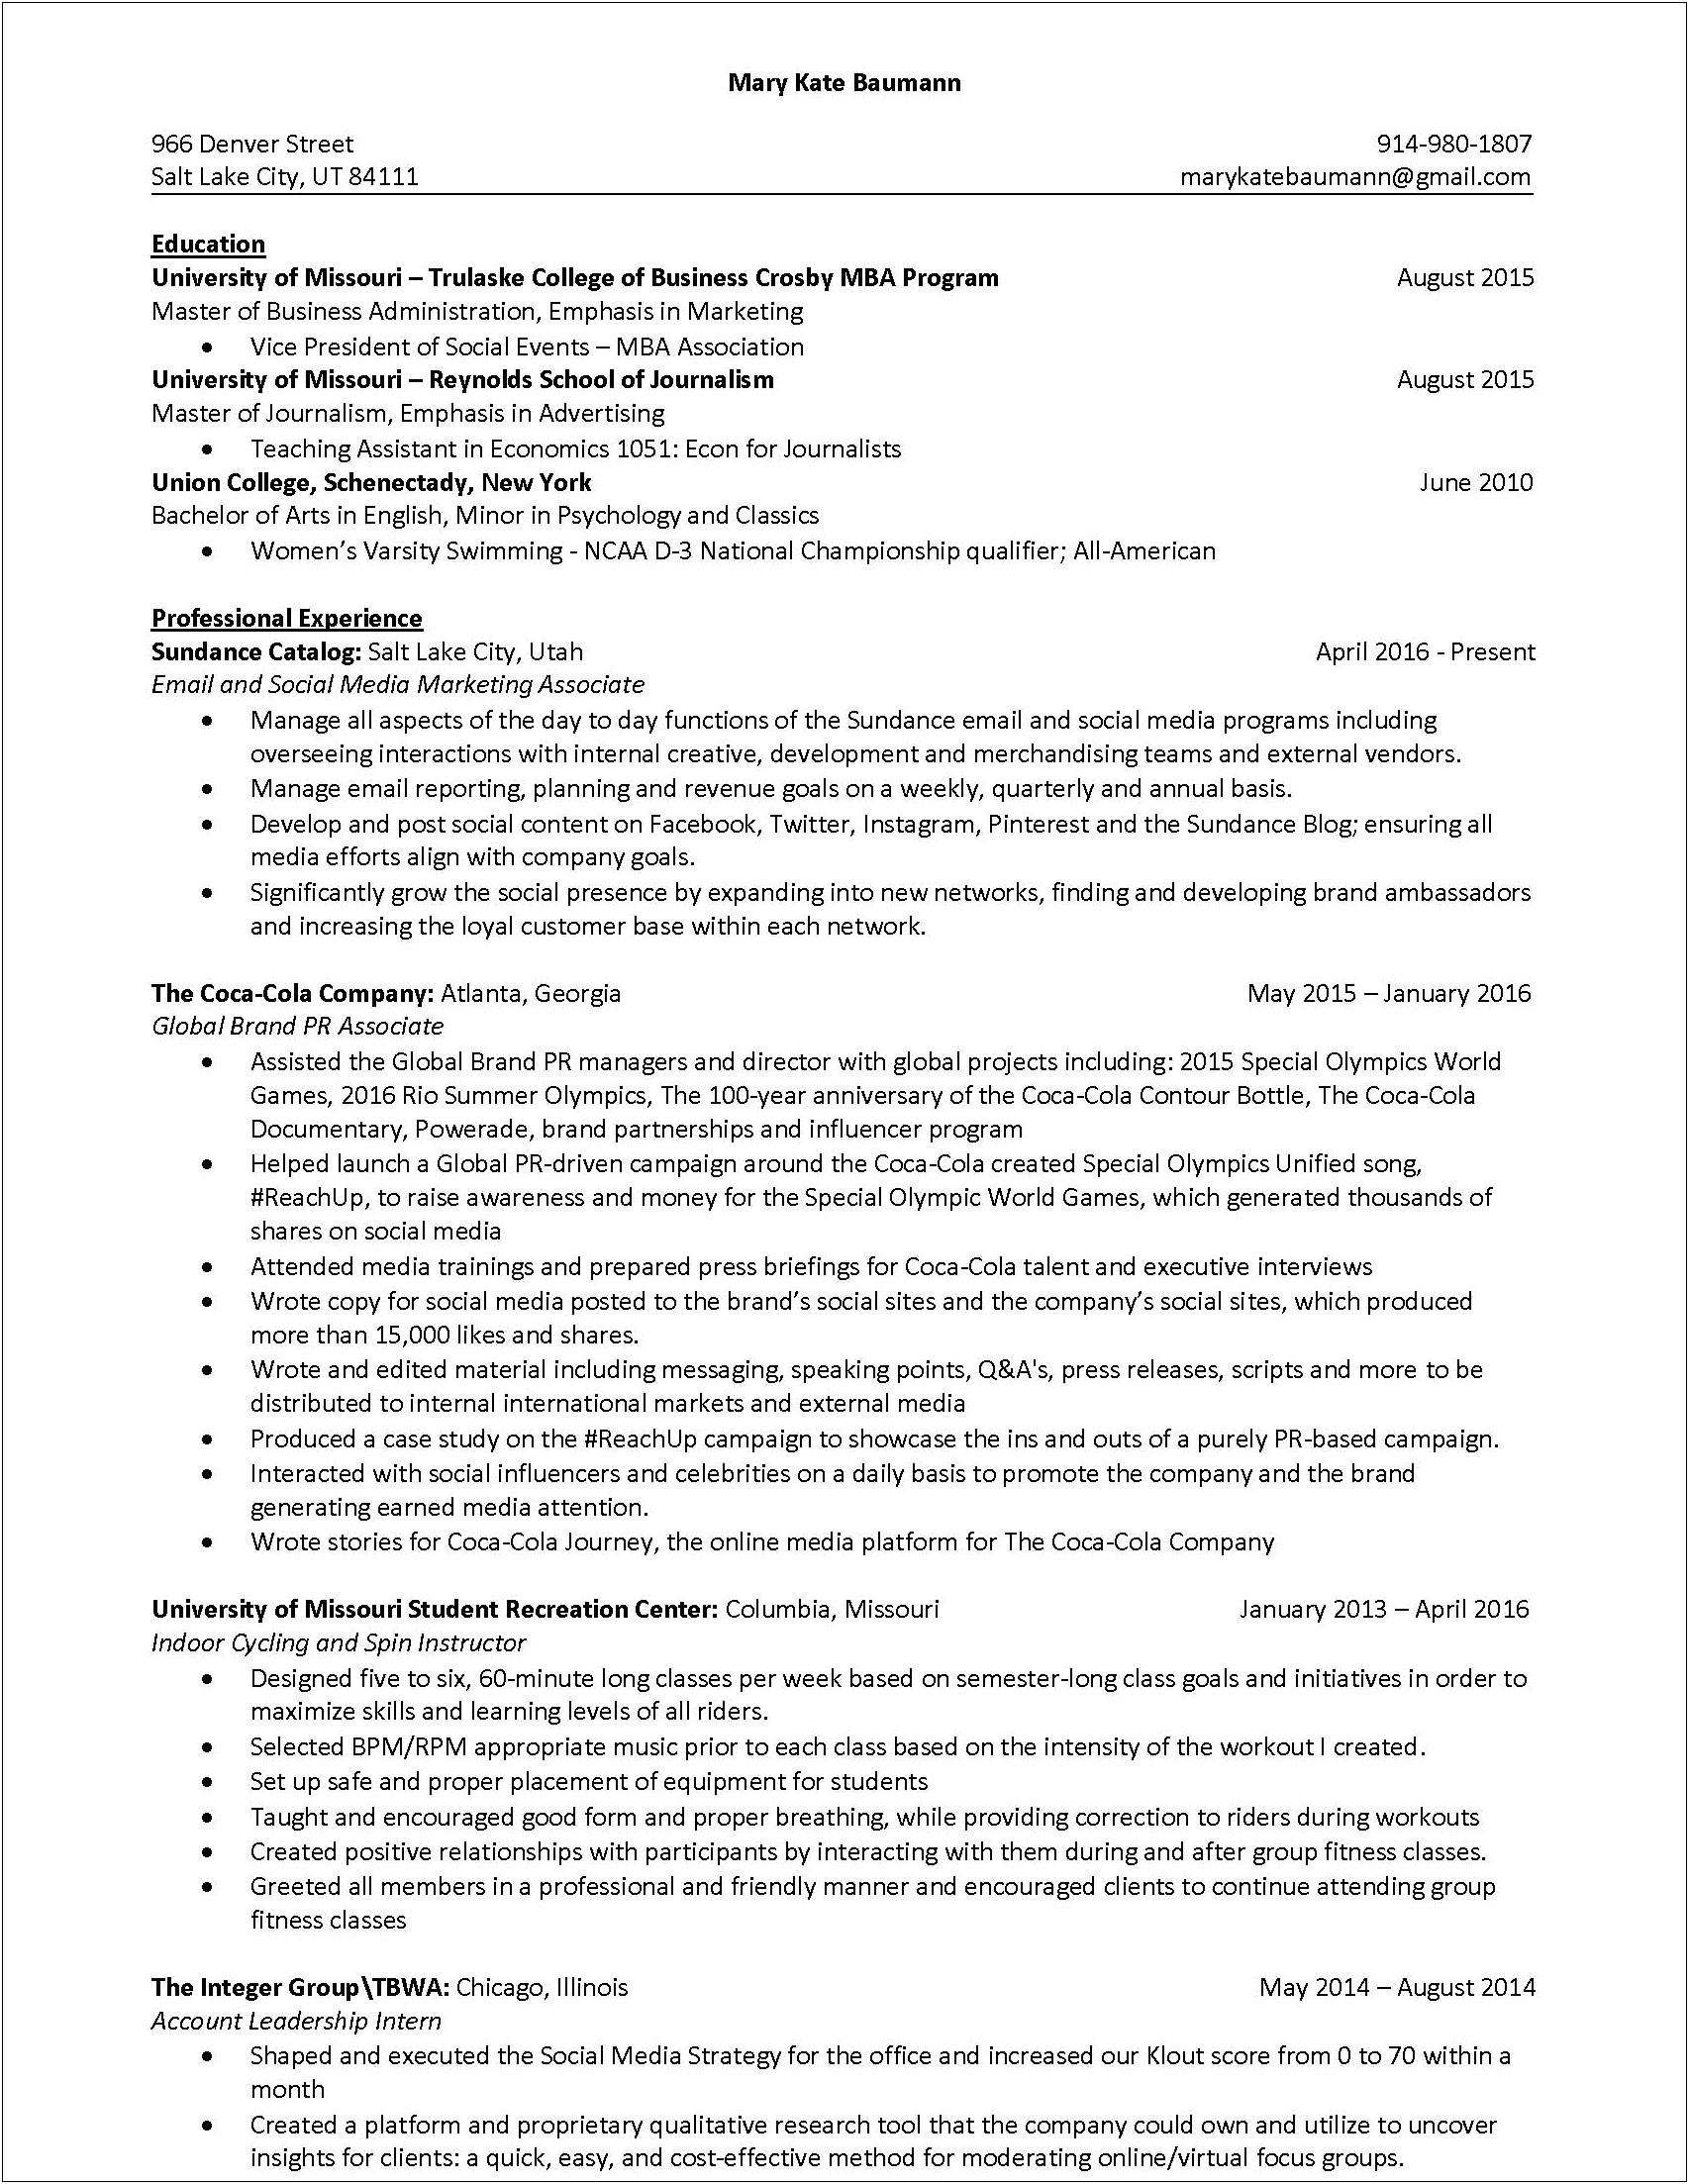 Qualitative Research Skills For Resume